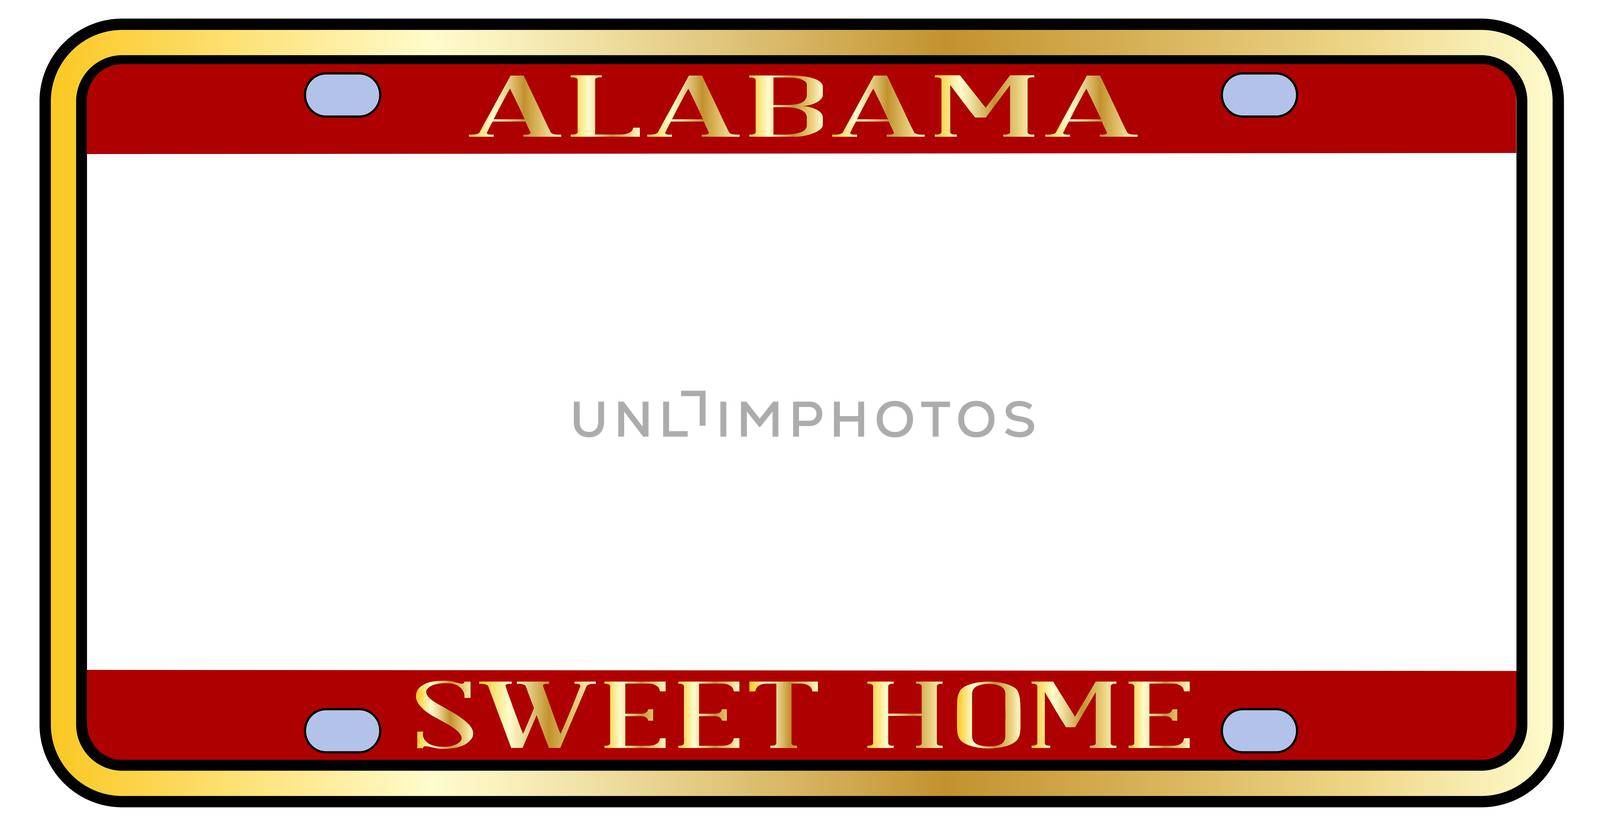 Blank Alabama state license plate in the colors of the state flag over a white background